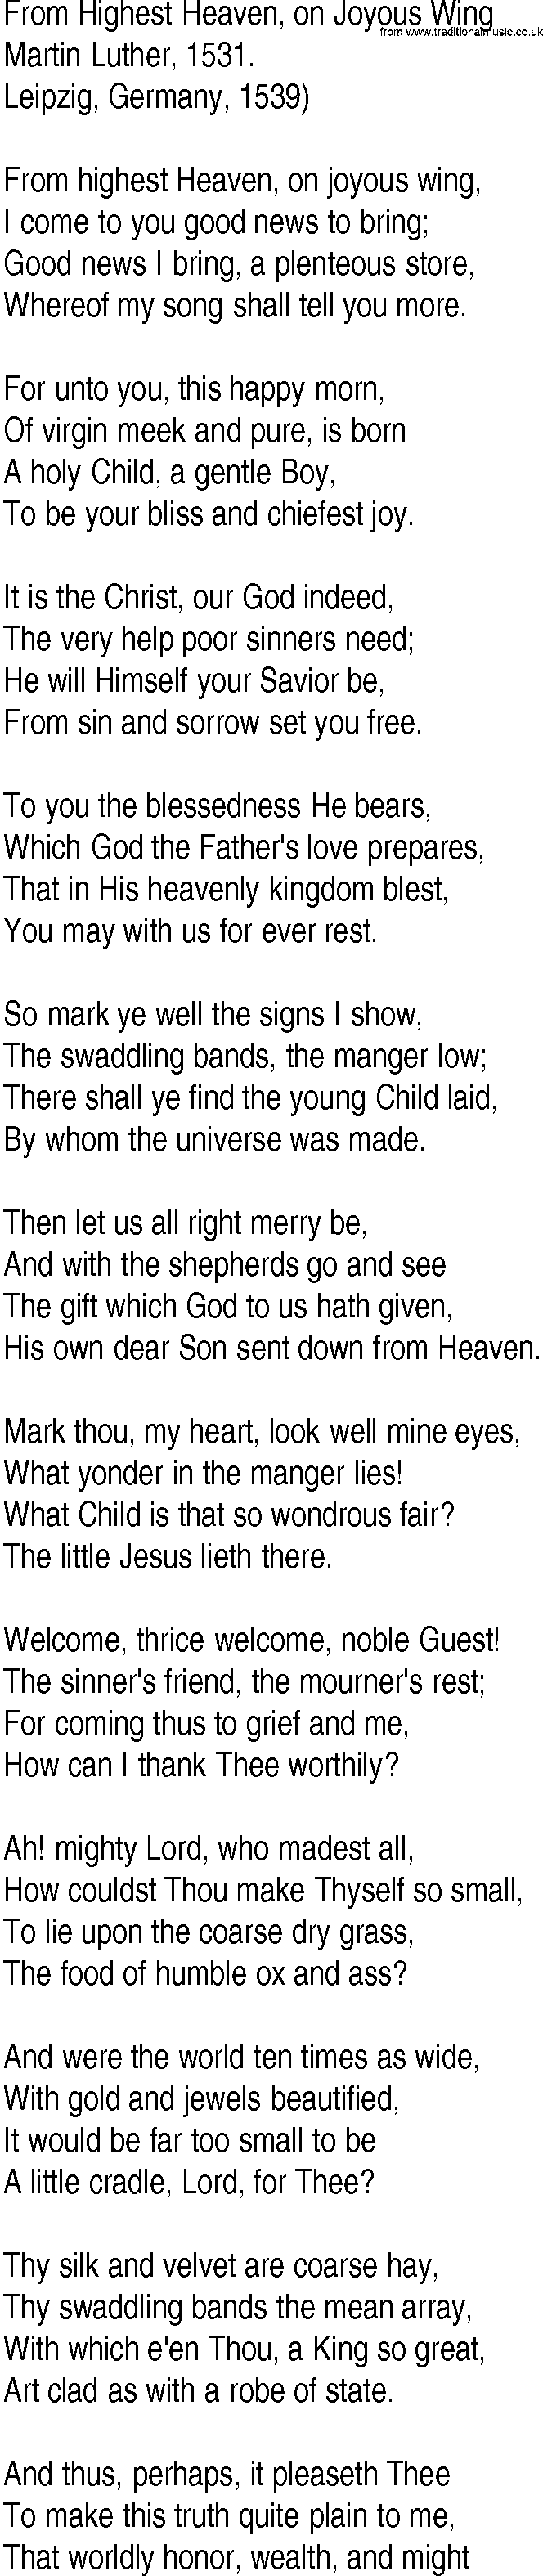 Hymn and Gospel Song: From Highest Heaven, on Joyous Wing by Martin Luther lyrics